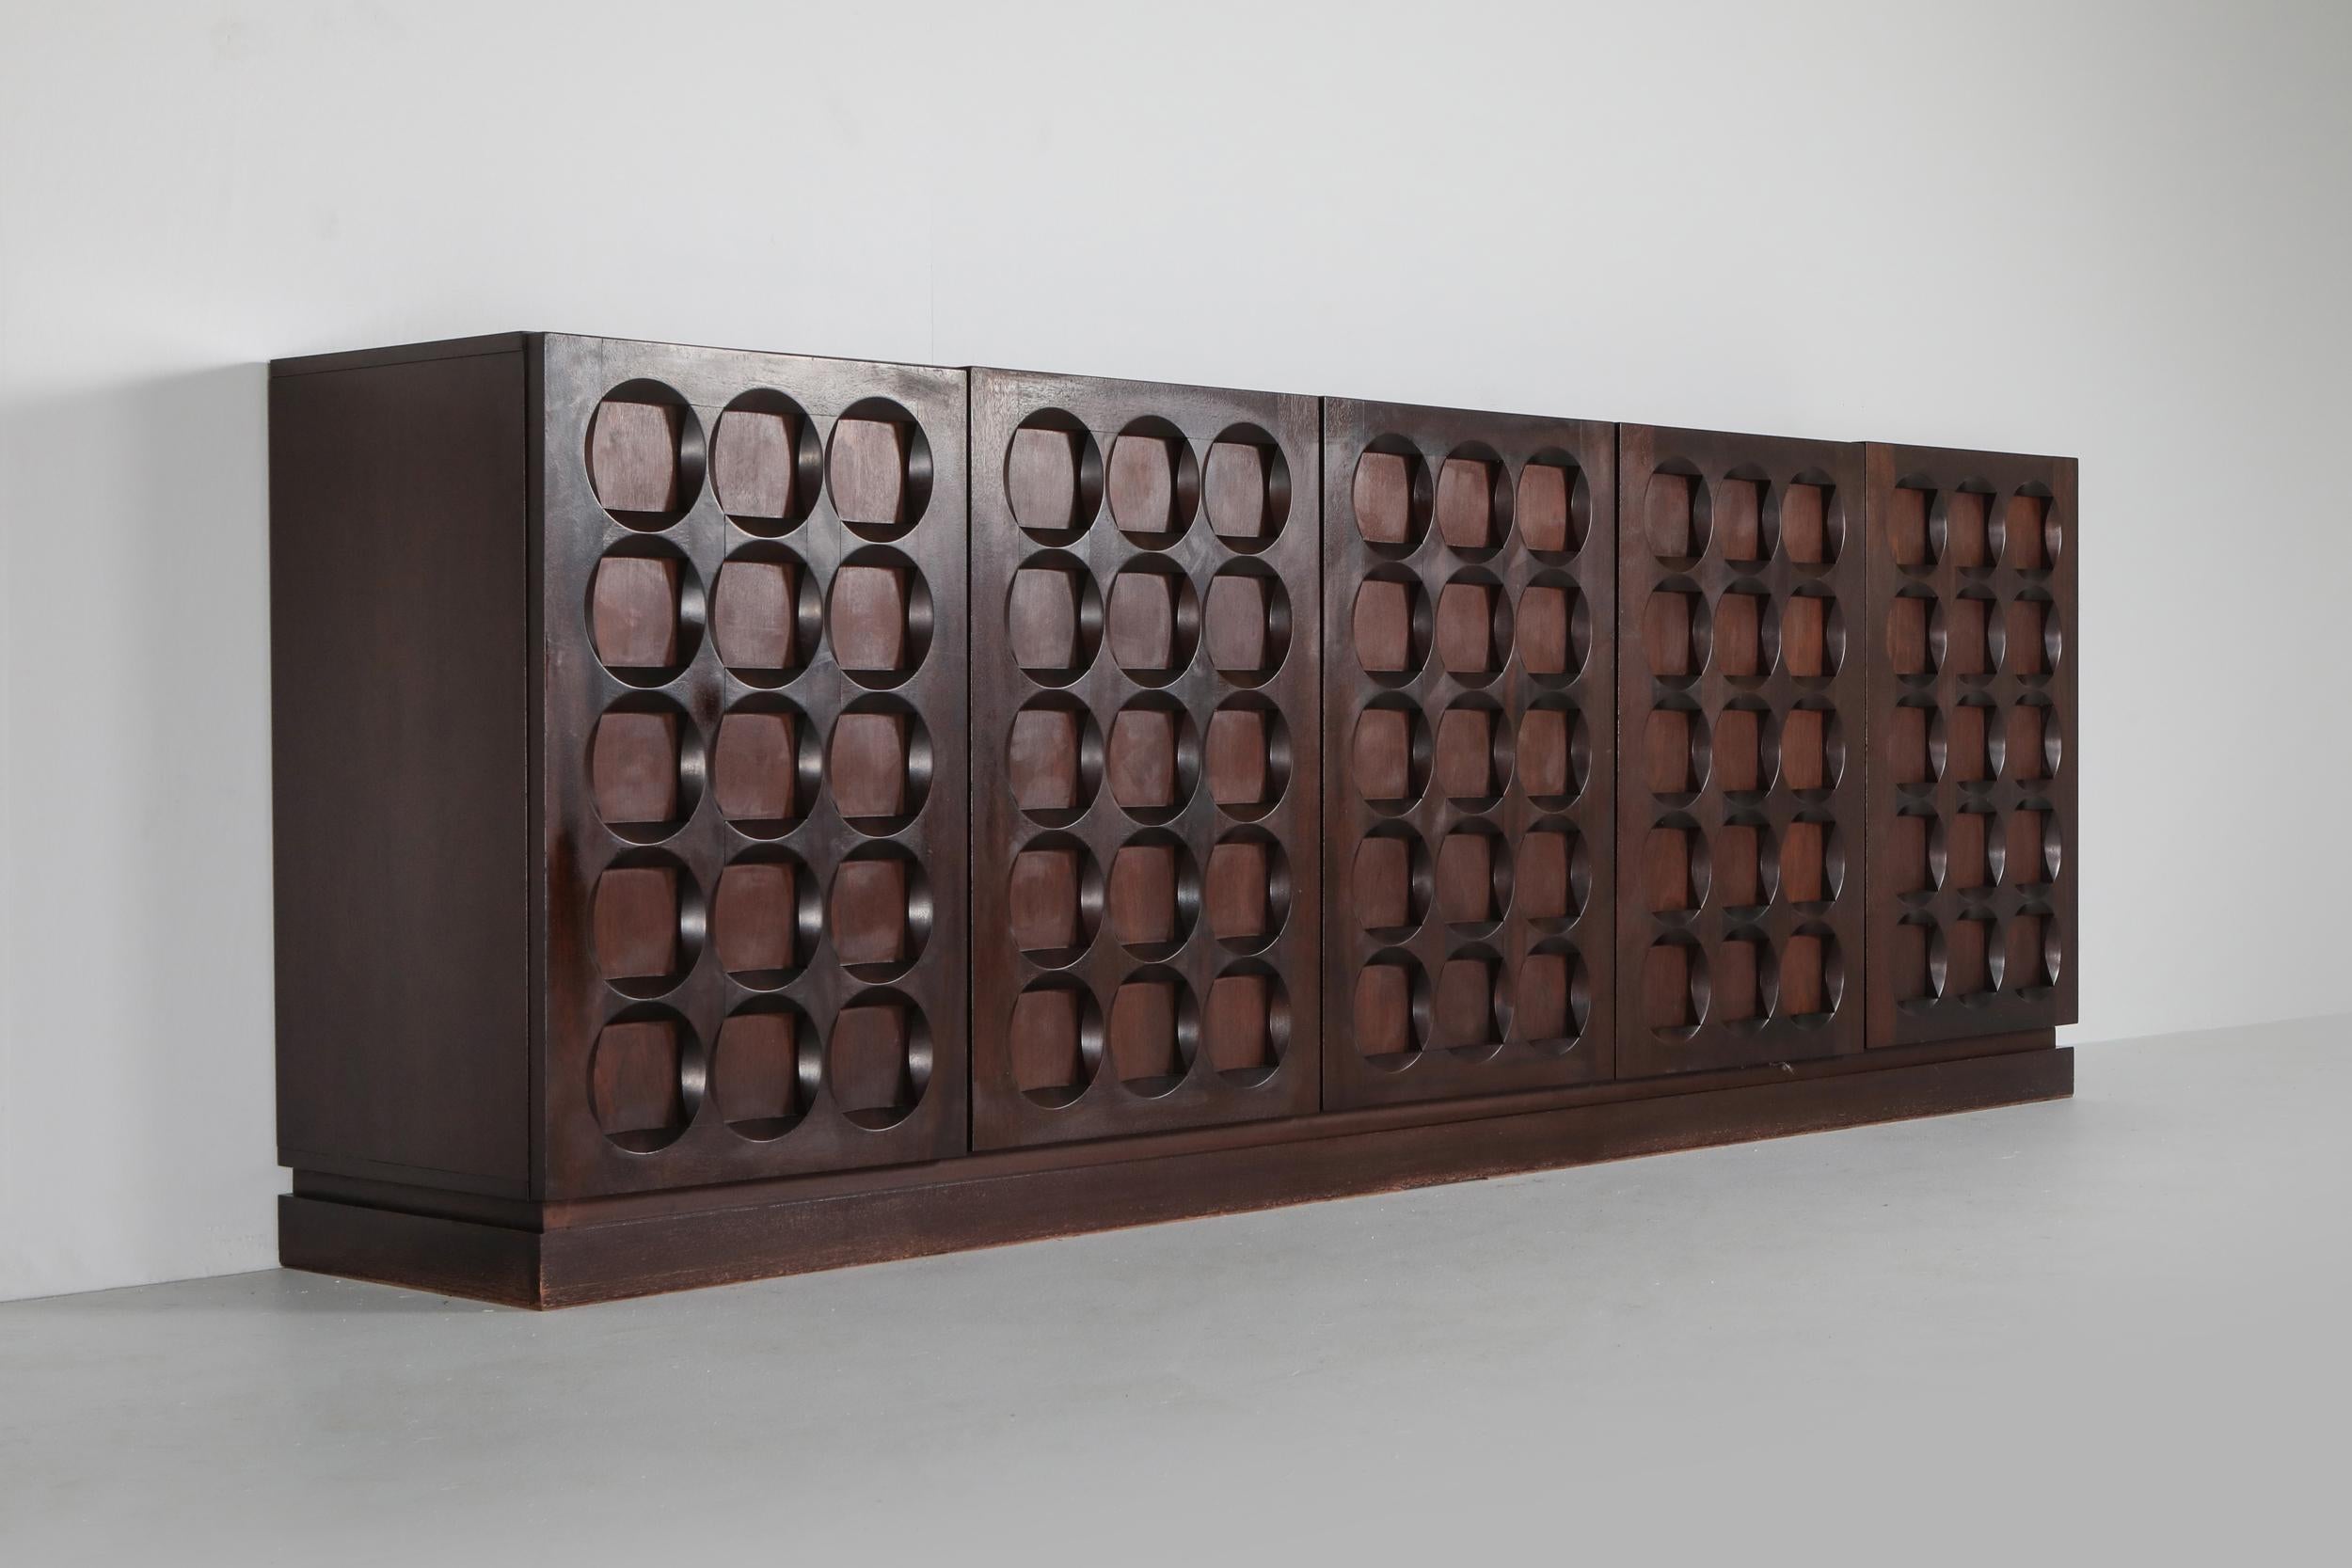 Late 20th Century Mahogany Credenza with Geometrical Patterned Doors